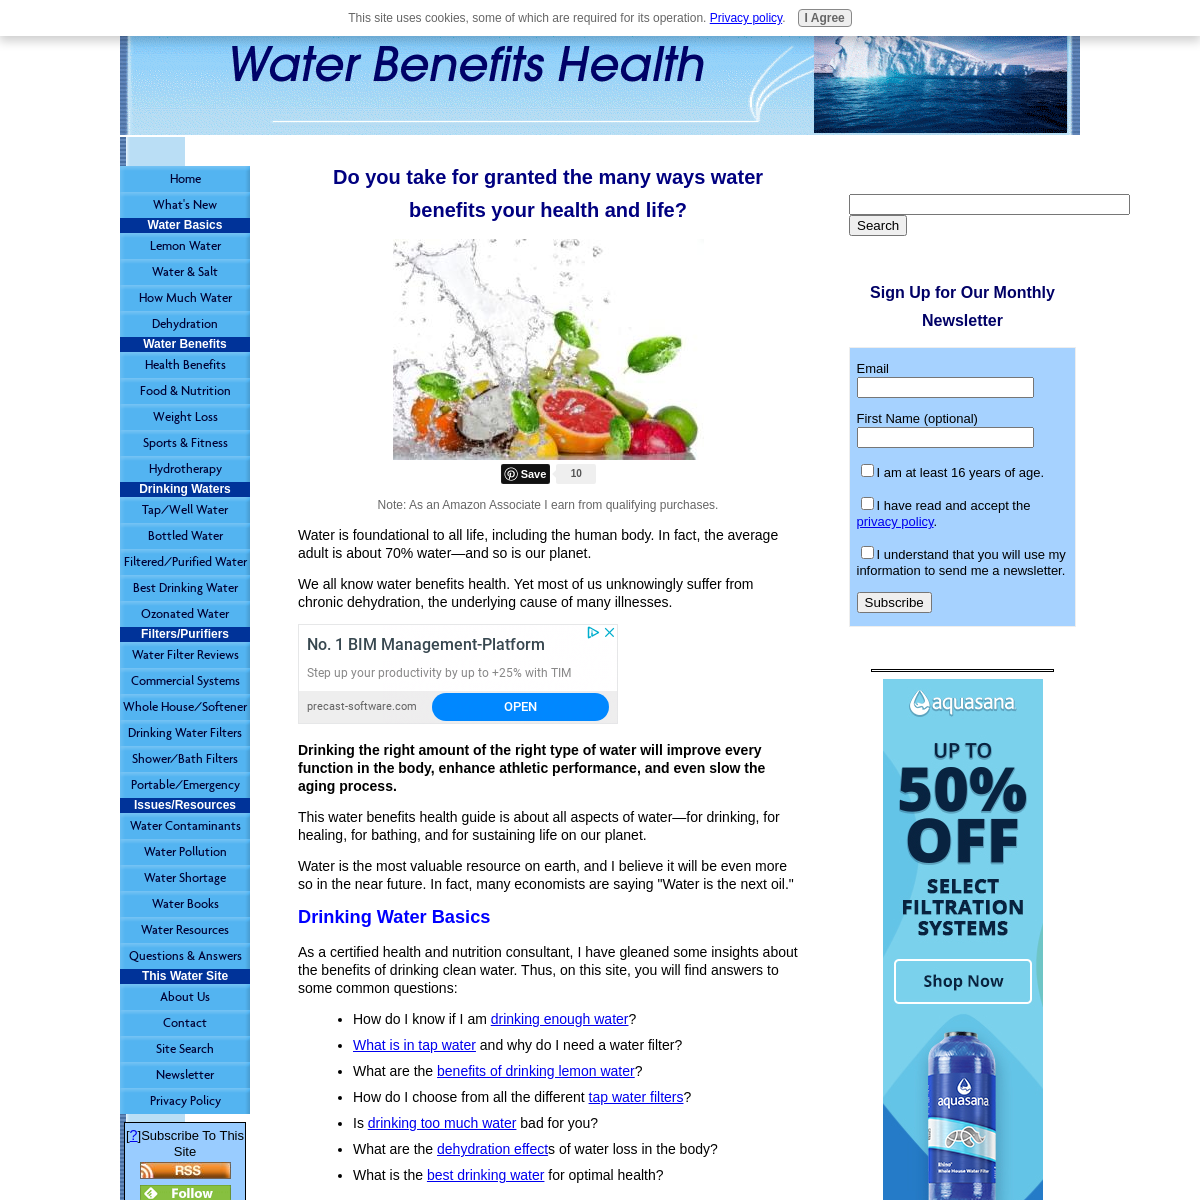 A complete backup of waterbenefitshealth.com